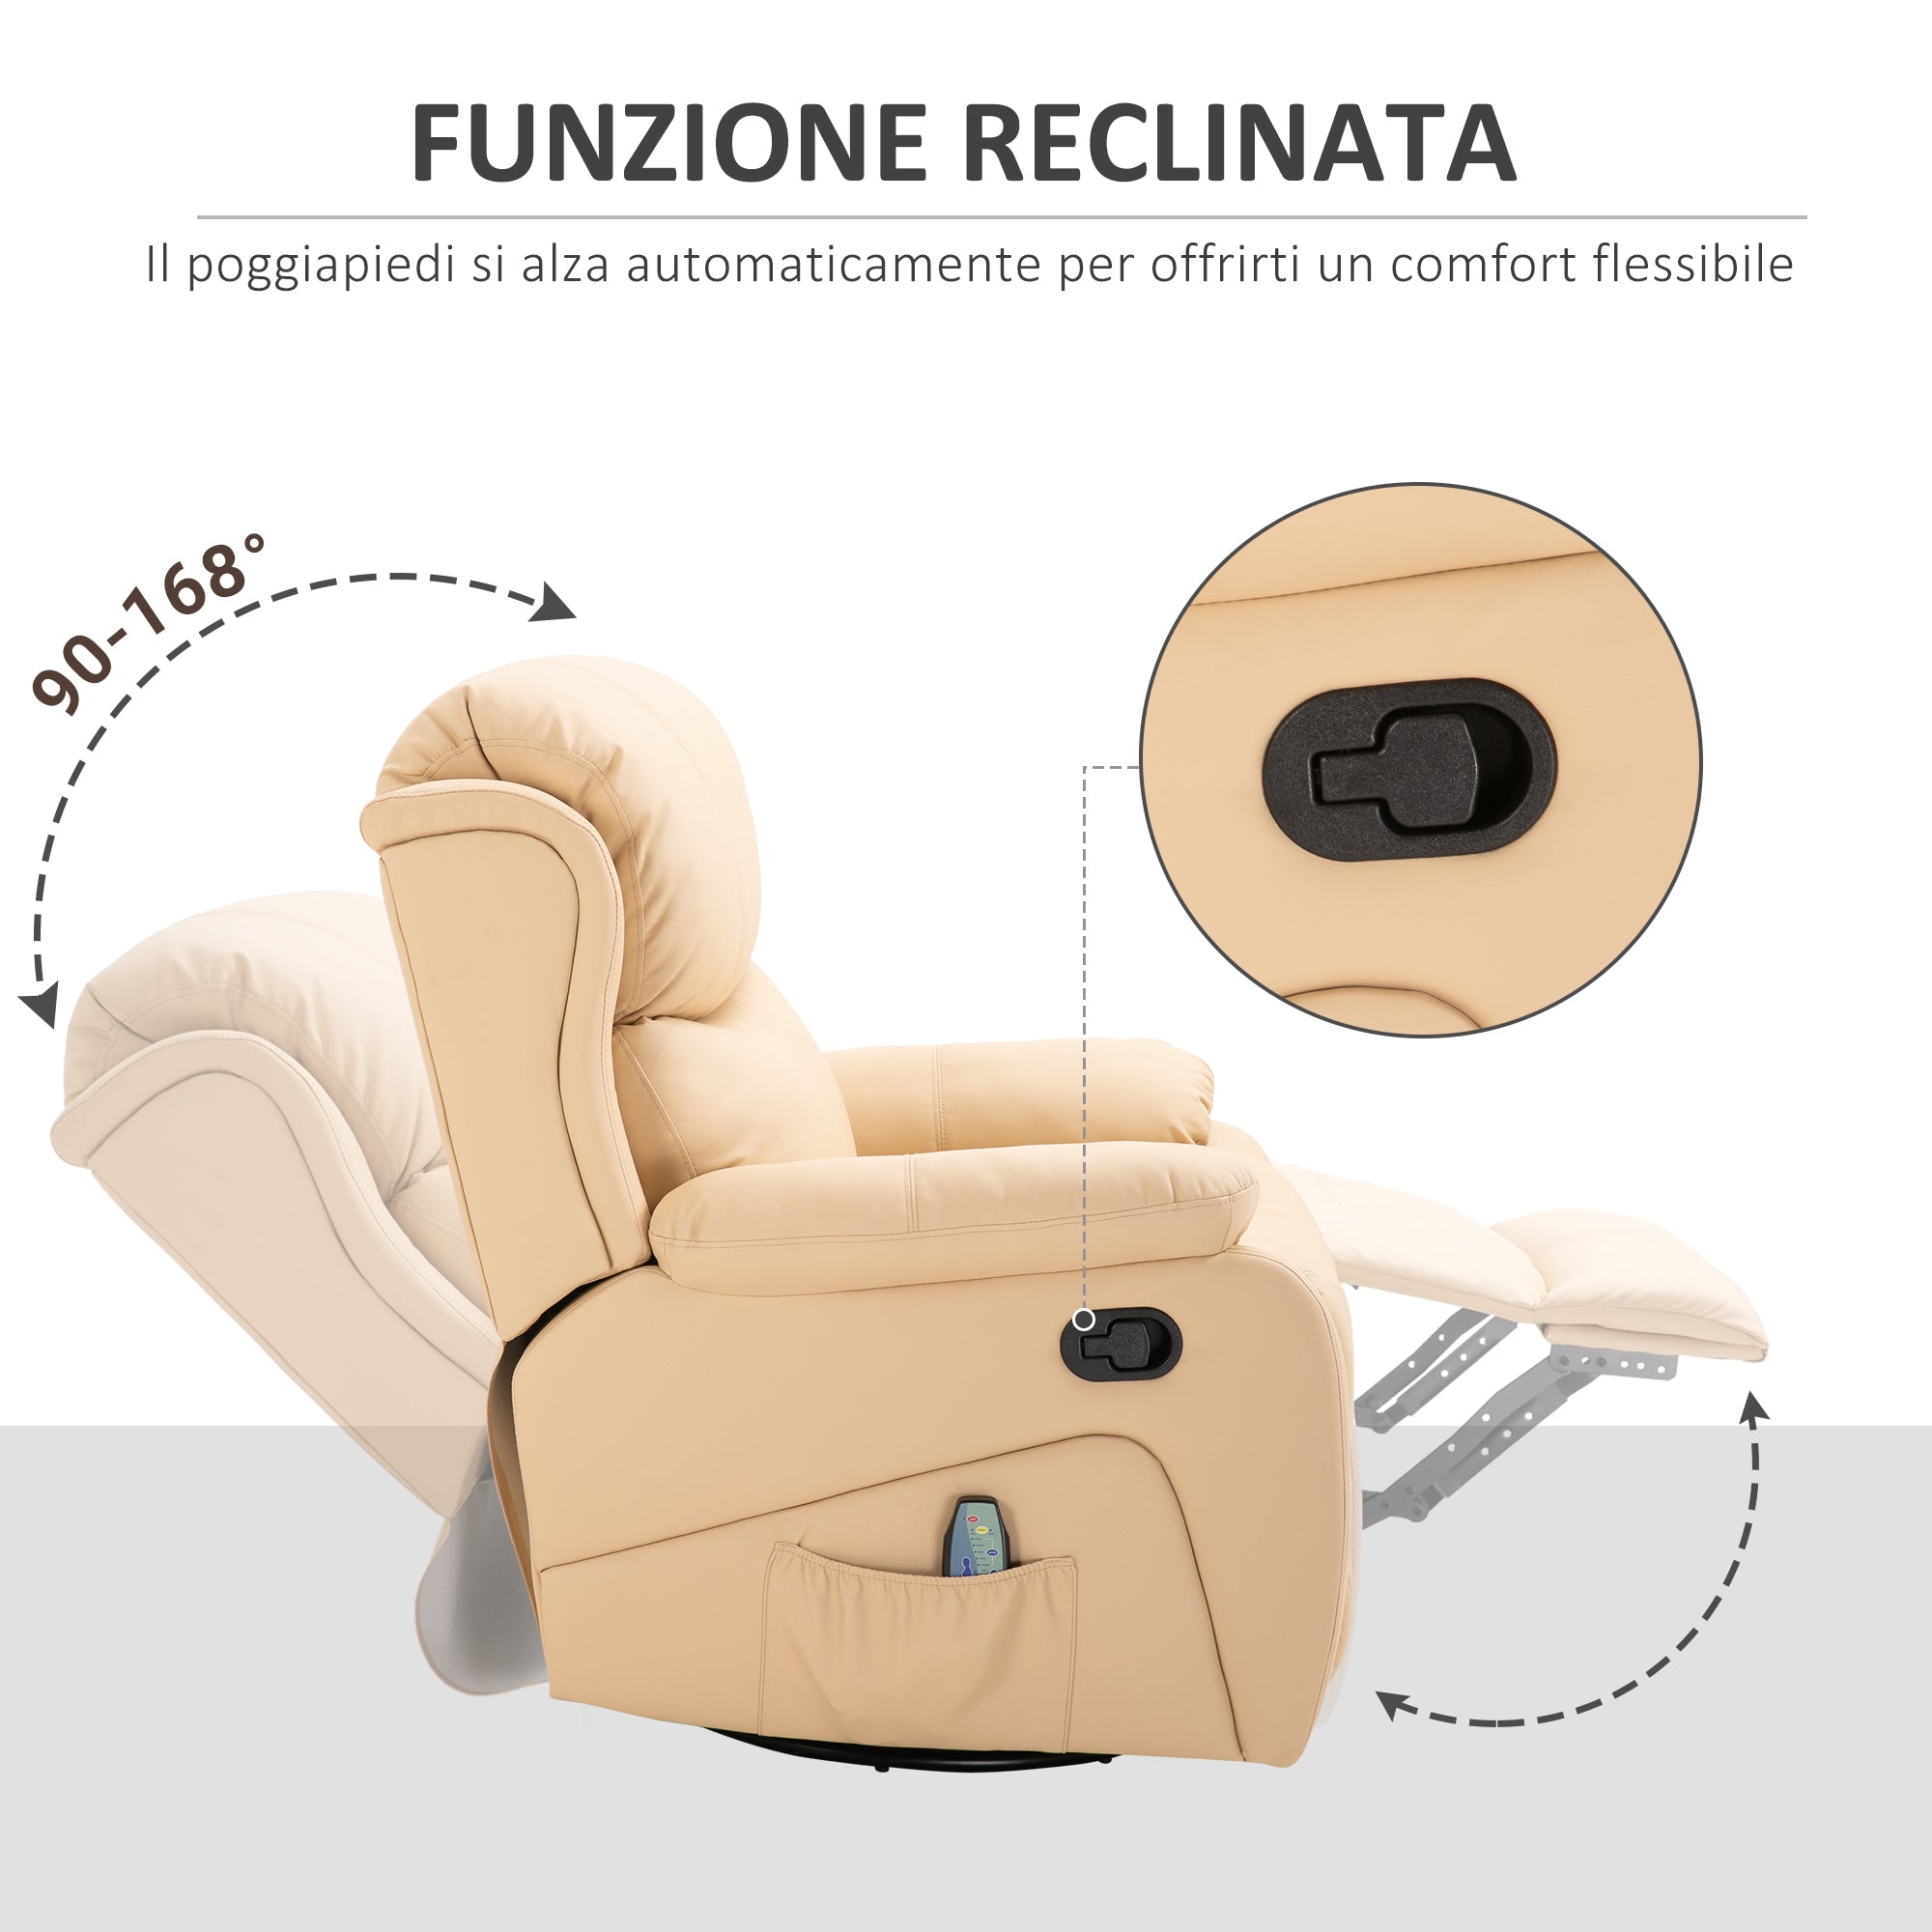 EASYCOMFORT Poltrona Relax Reclinabile Manuale in Similpelle, Marrone,  75x92x99cm